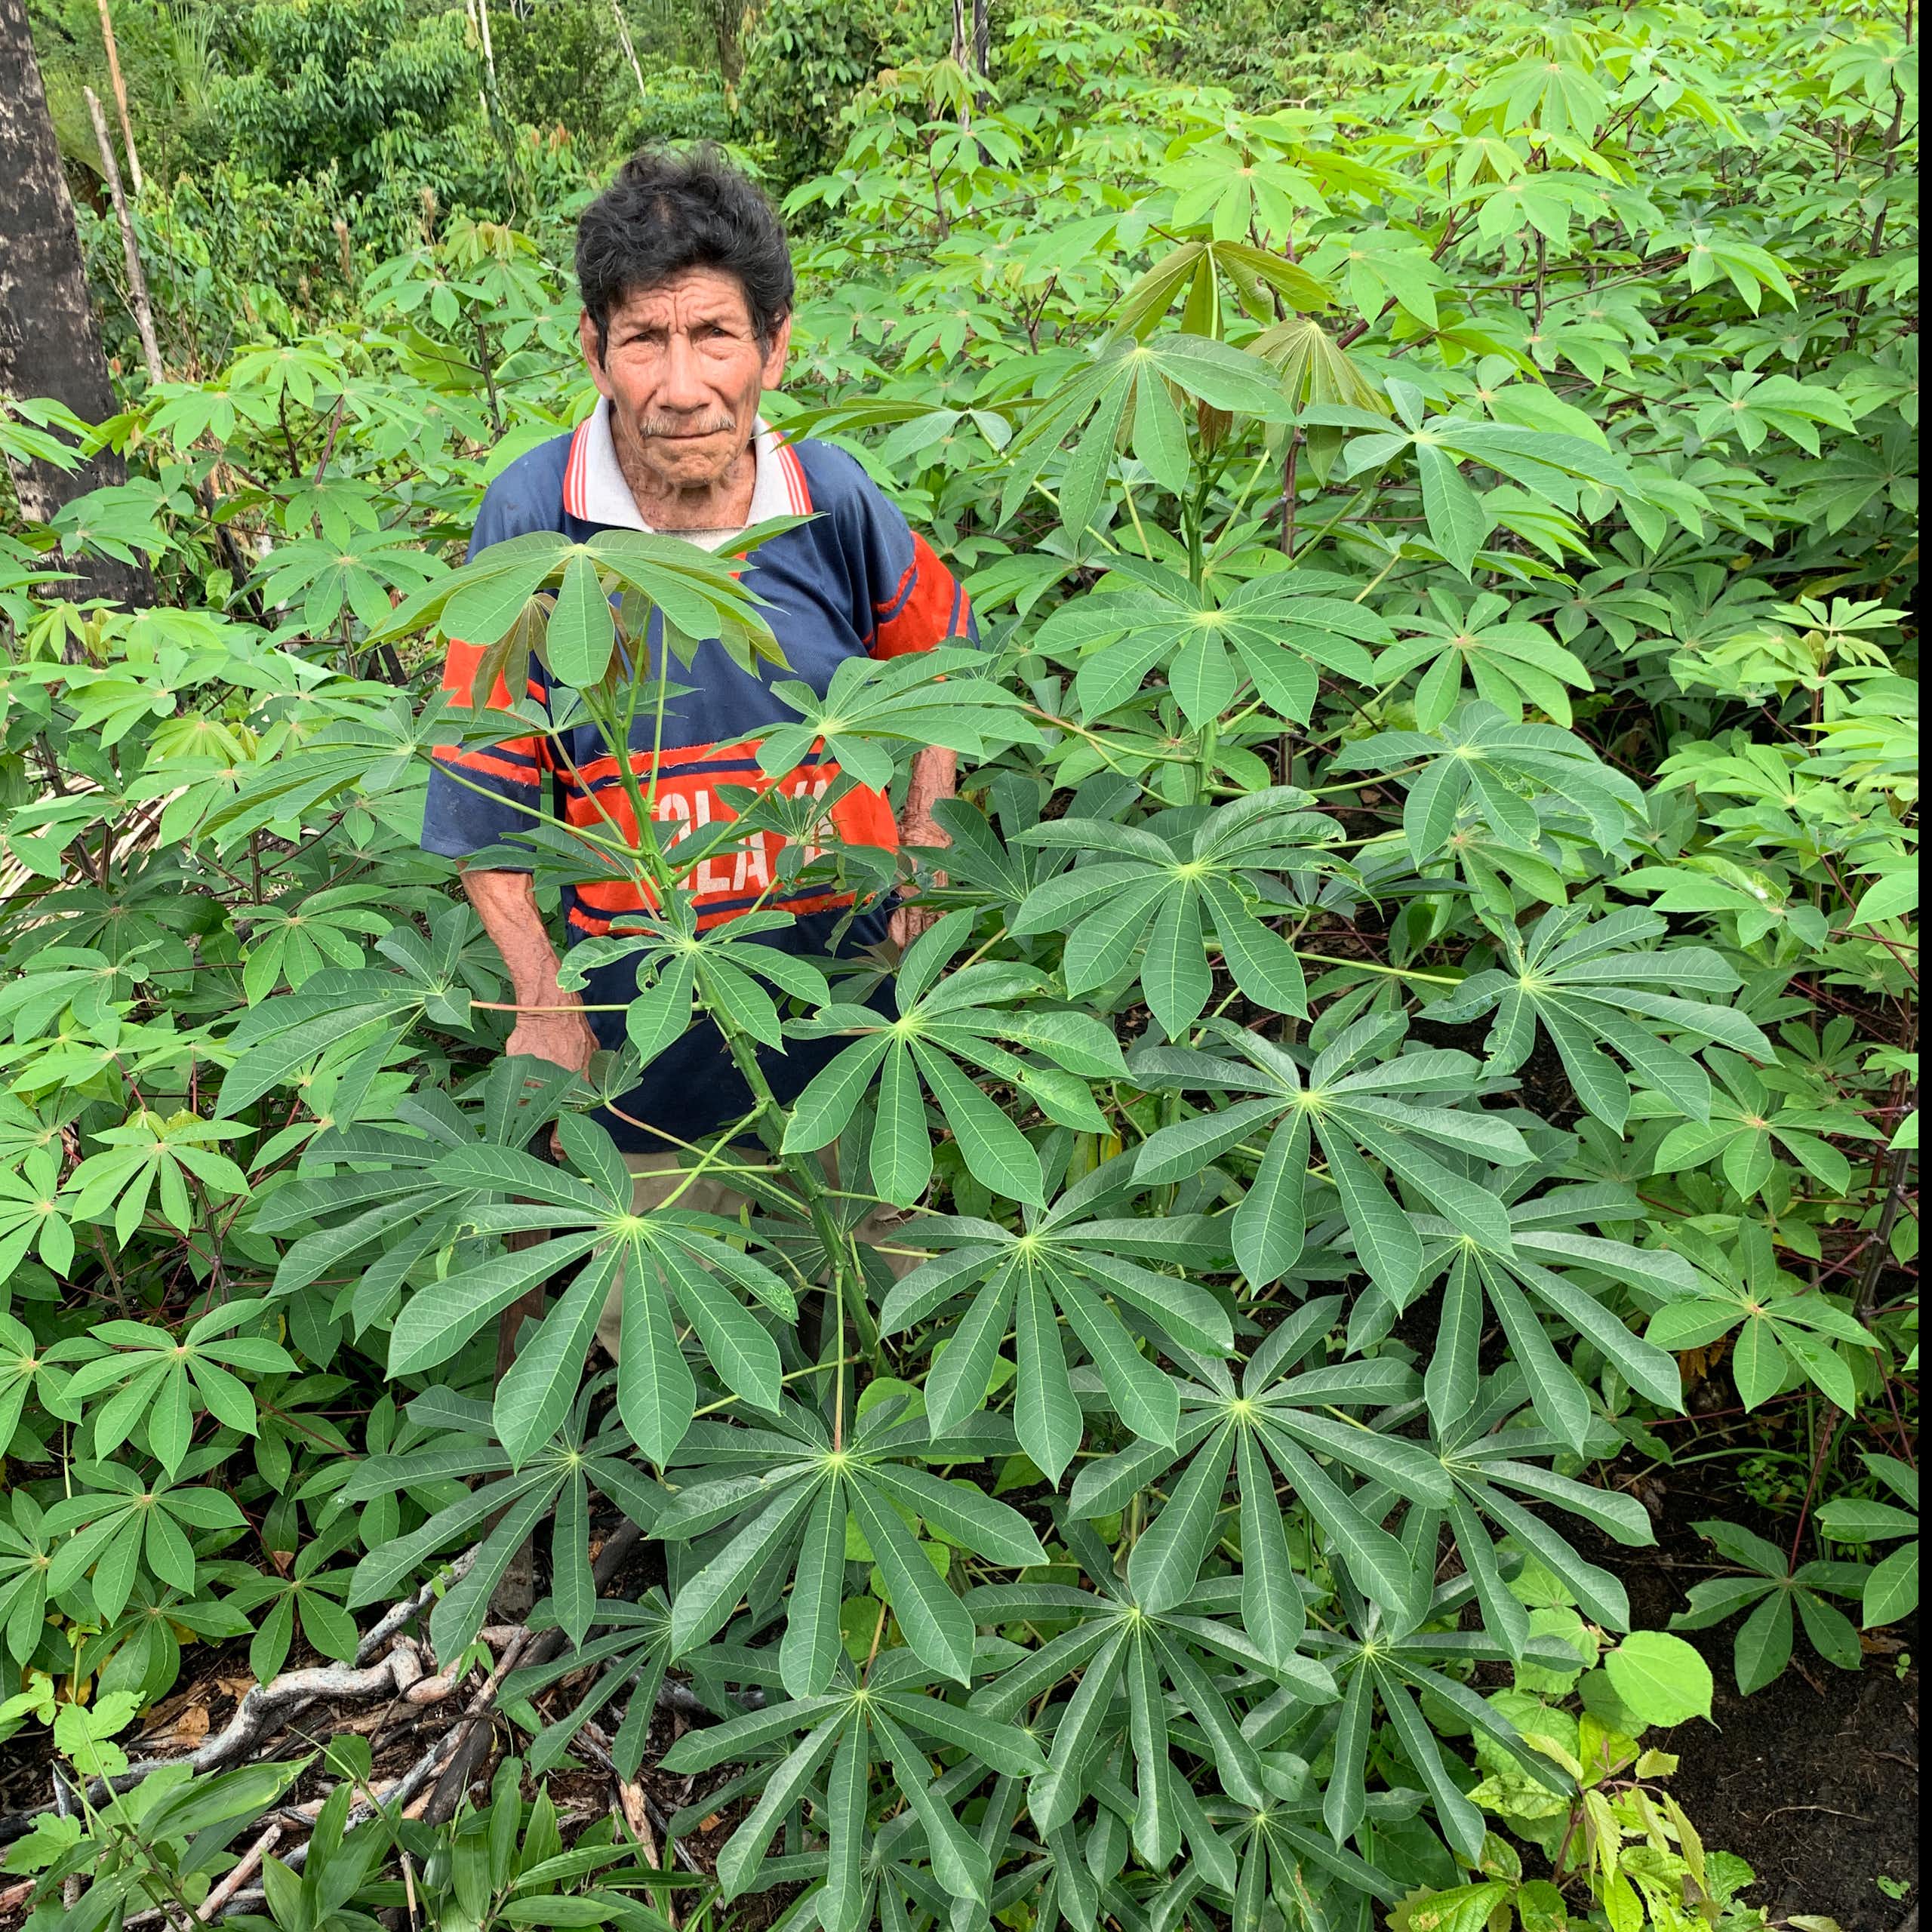 Cassava: The perilous past and promising future of a toxic but nourishing crop